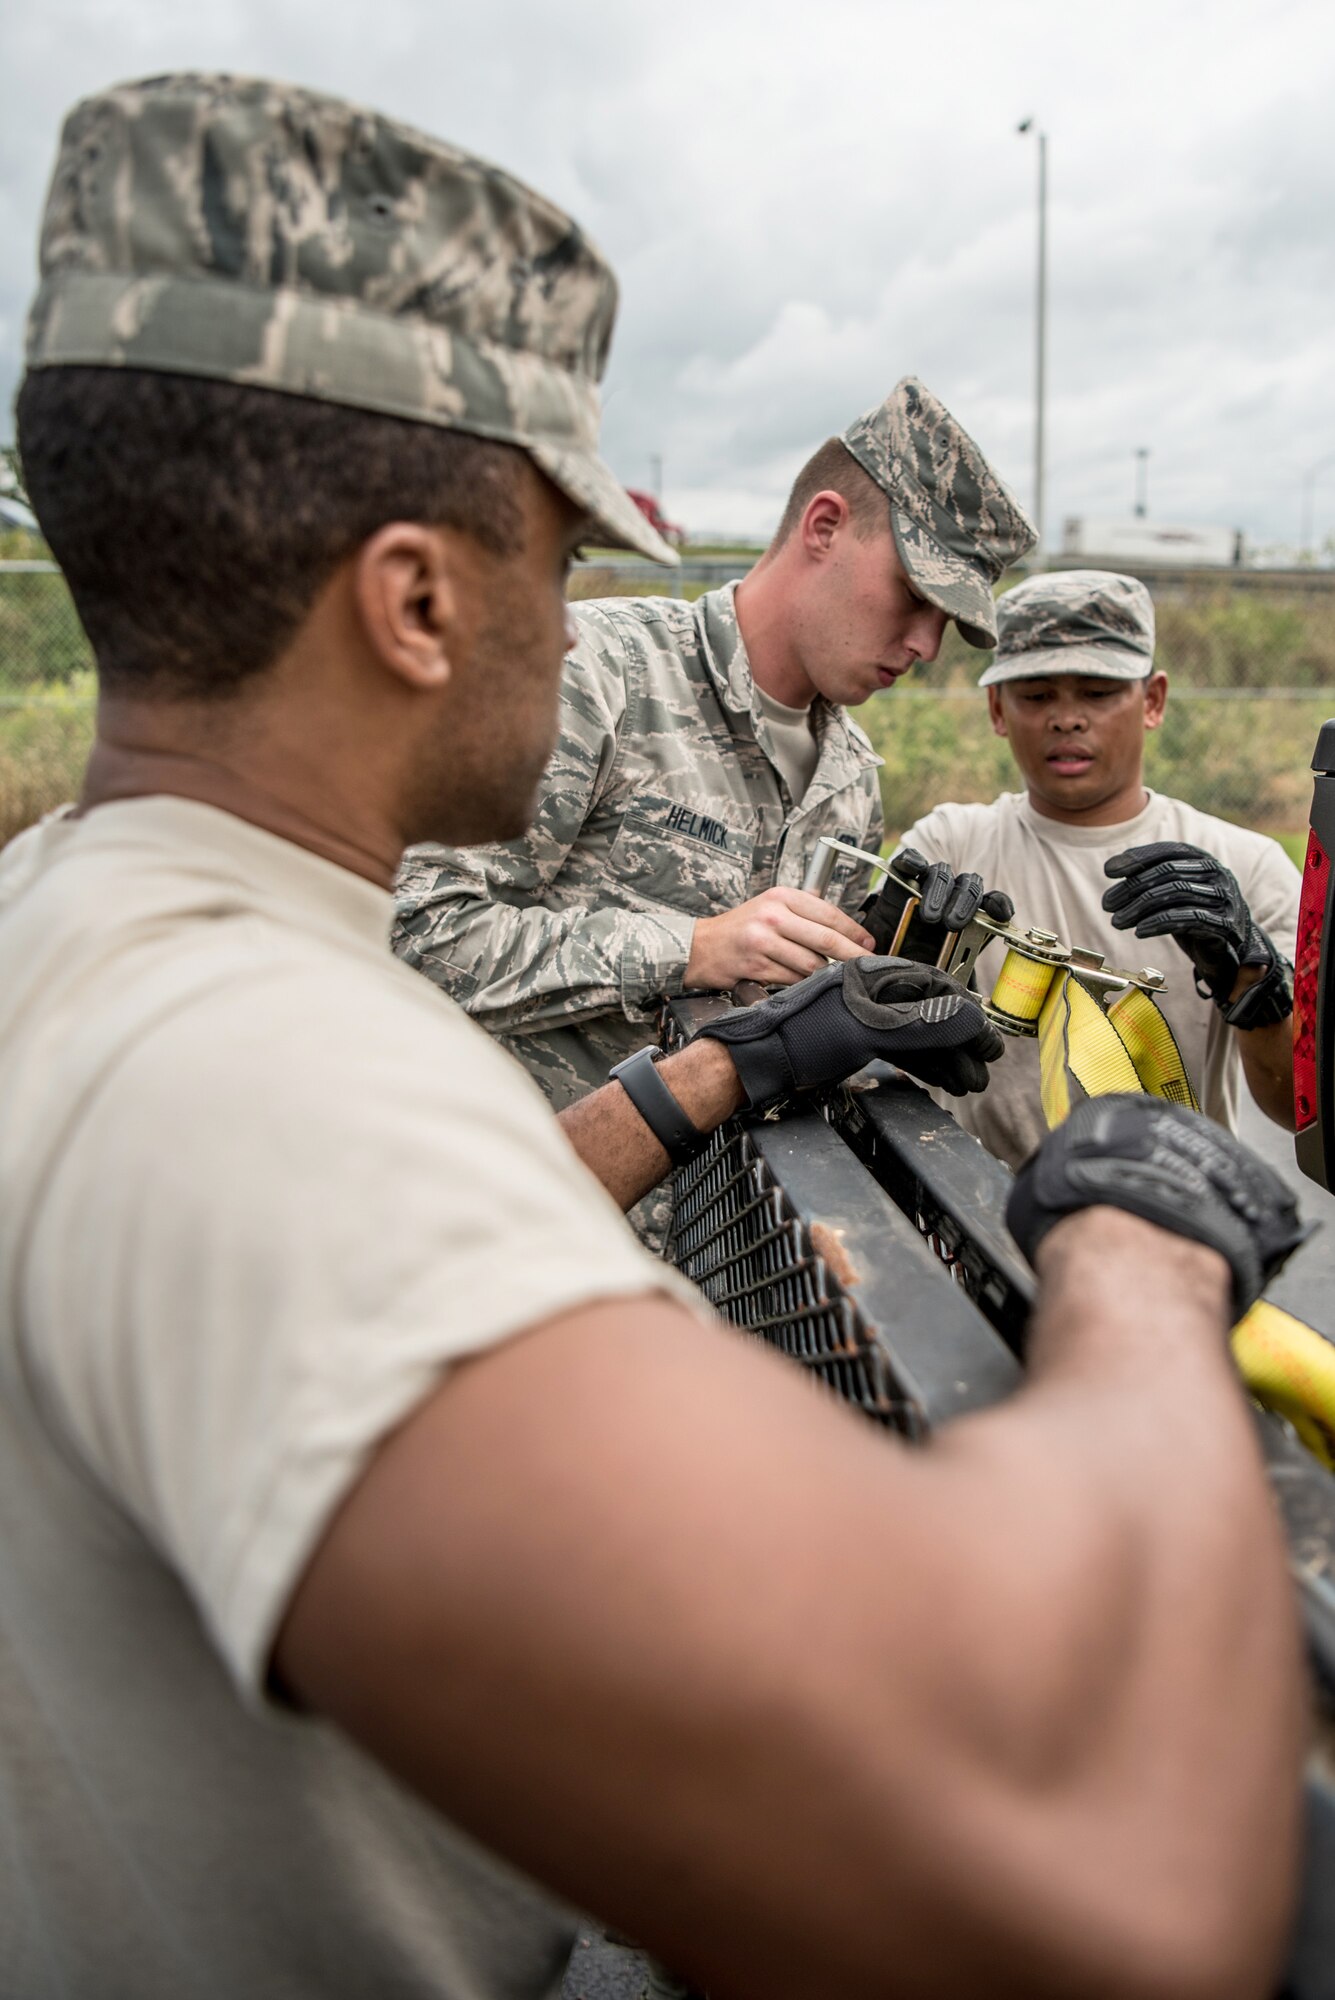 Members of the 123rd Airlift Wing’s Fatality Search and Recovery Team strap down equipment at the Kentucky Air National Guard Base in Louisville, Ky., Sept. 17, 2018, prior to deploying to North Carolina to support operations in the wake of Hurricane Florence. The team, which specializes in the dignified recovery of deceased personnel, will assist the North Carolina medical examiner’s office at the request of local health officials.